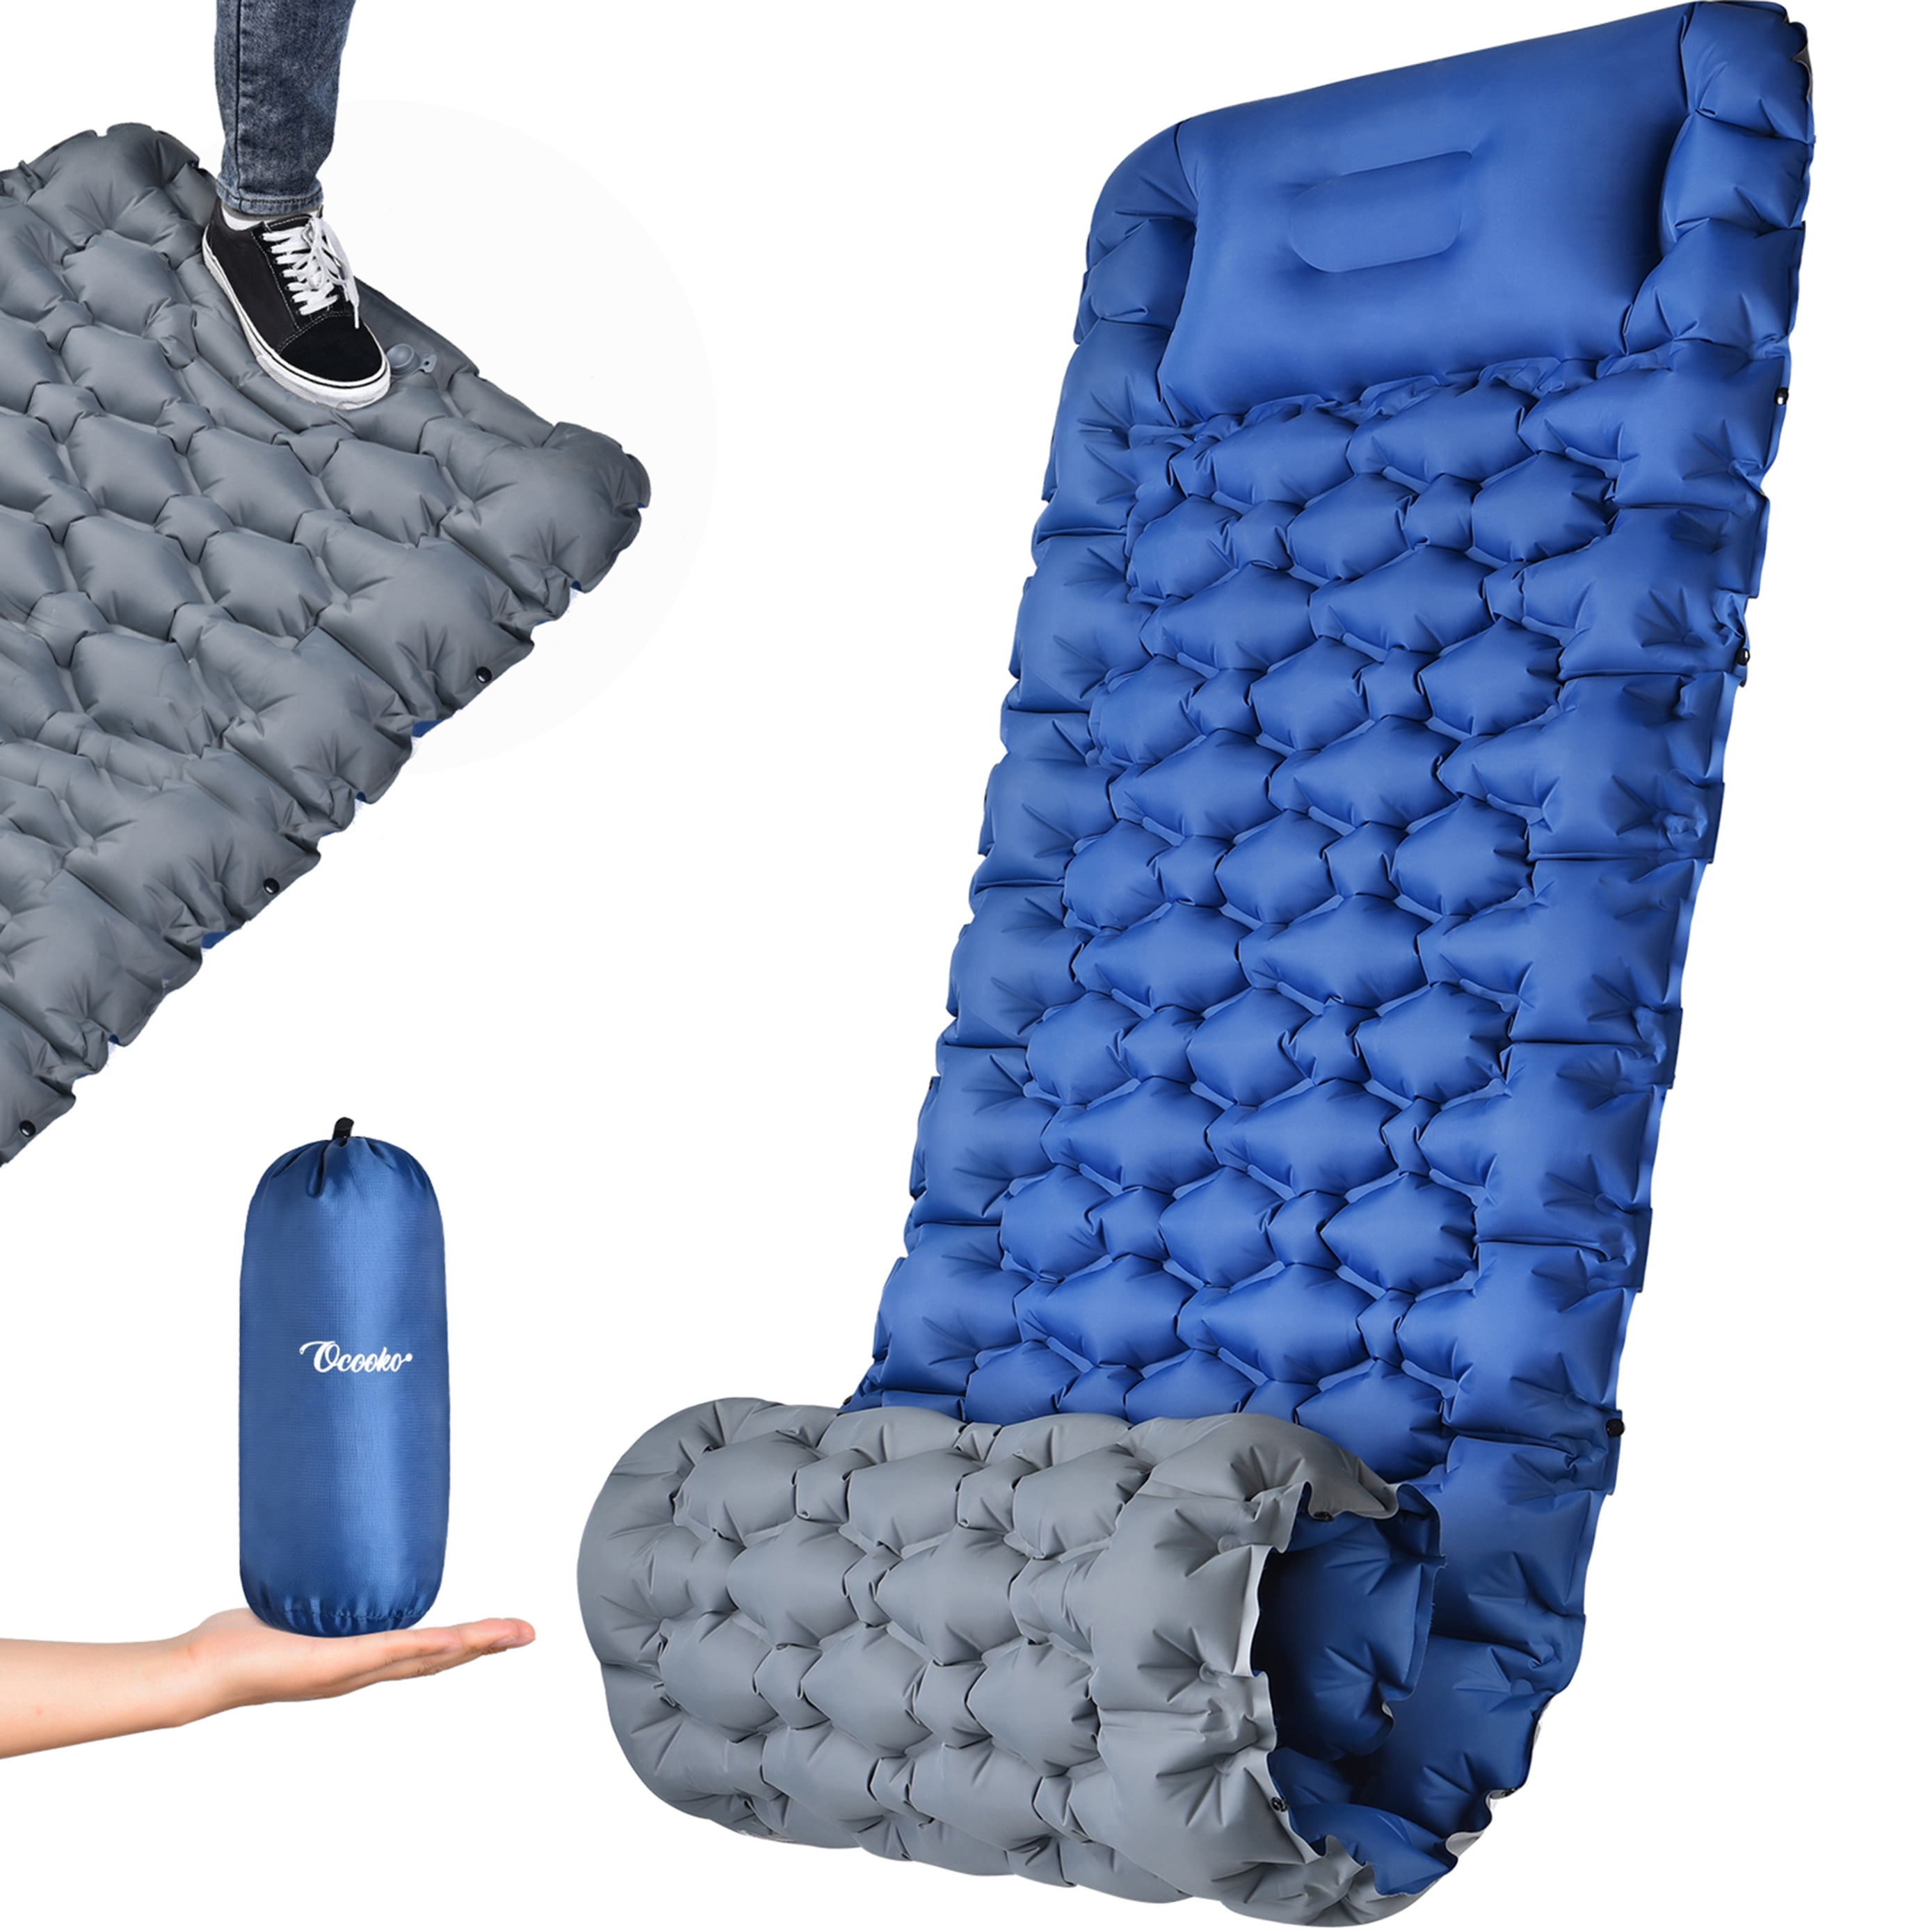 BASE L SELF INFLATE MAT is large camp lightweight thermalite air bed airbed blue 